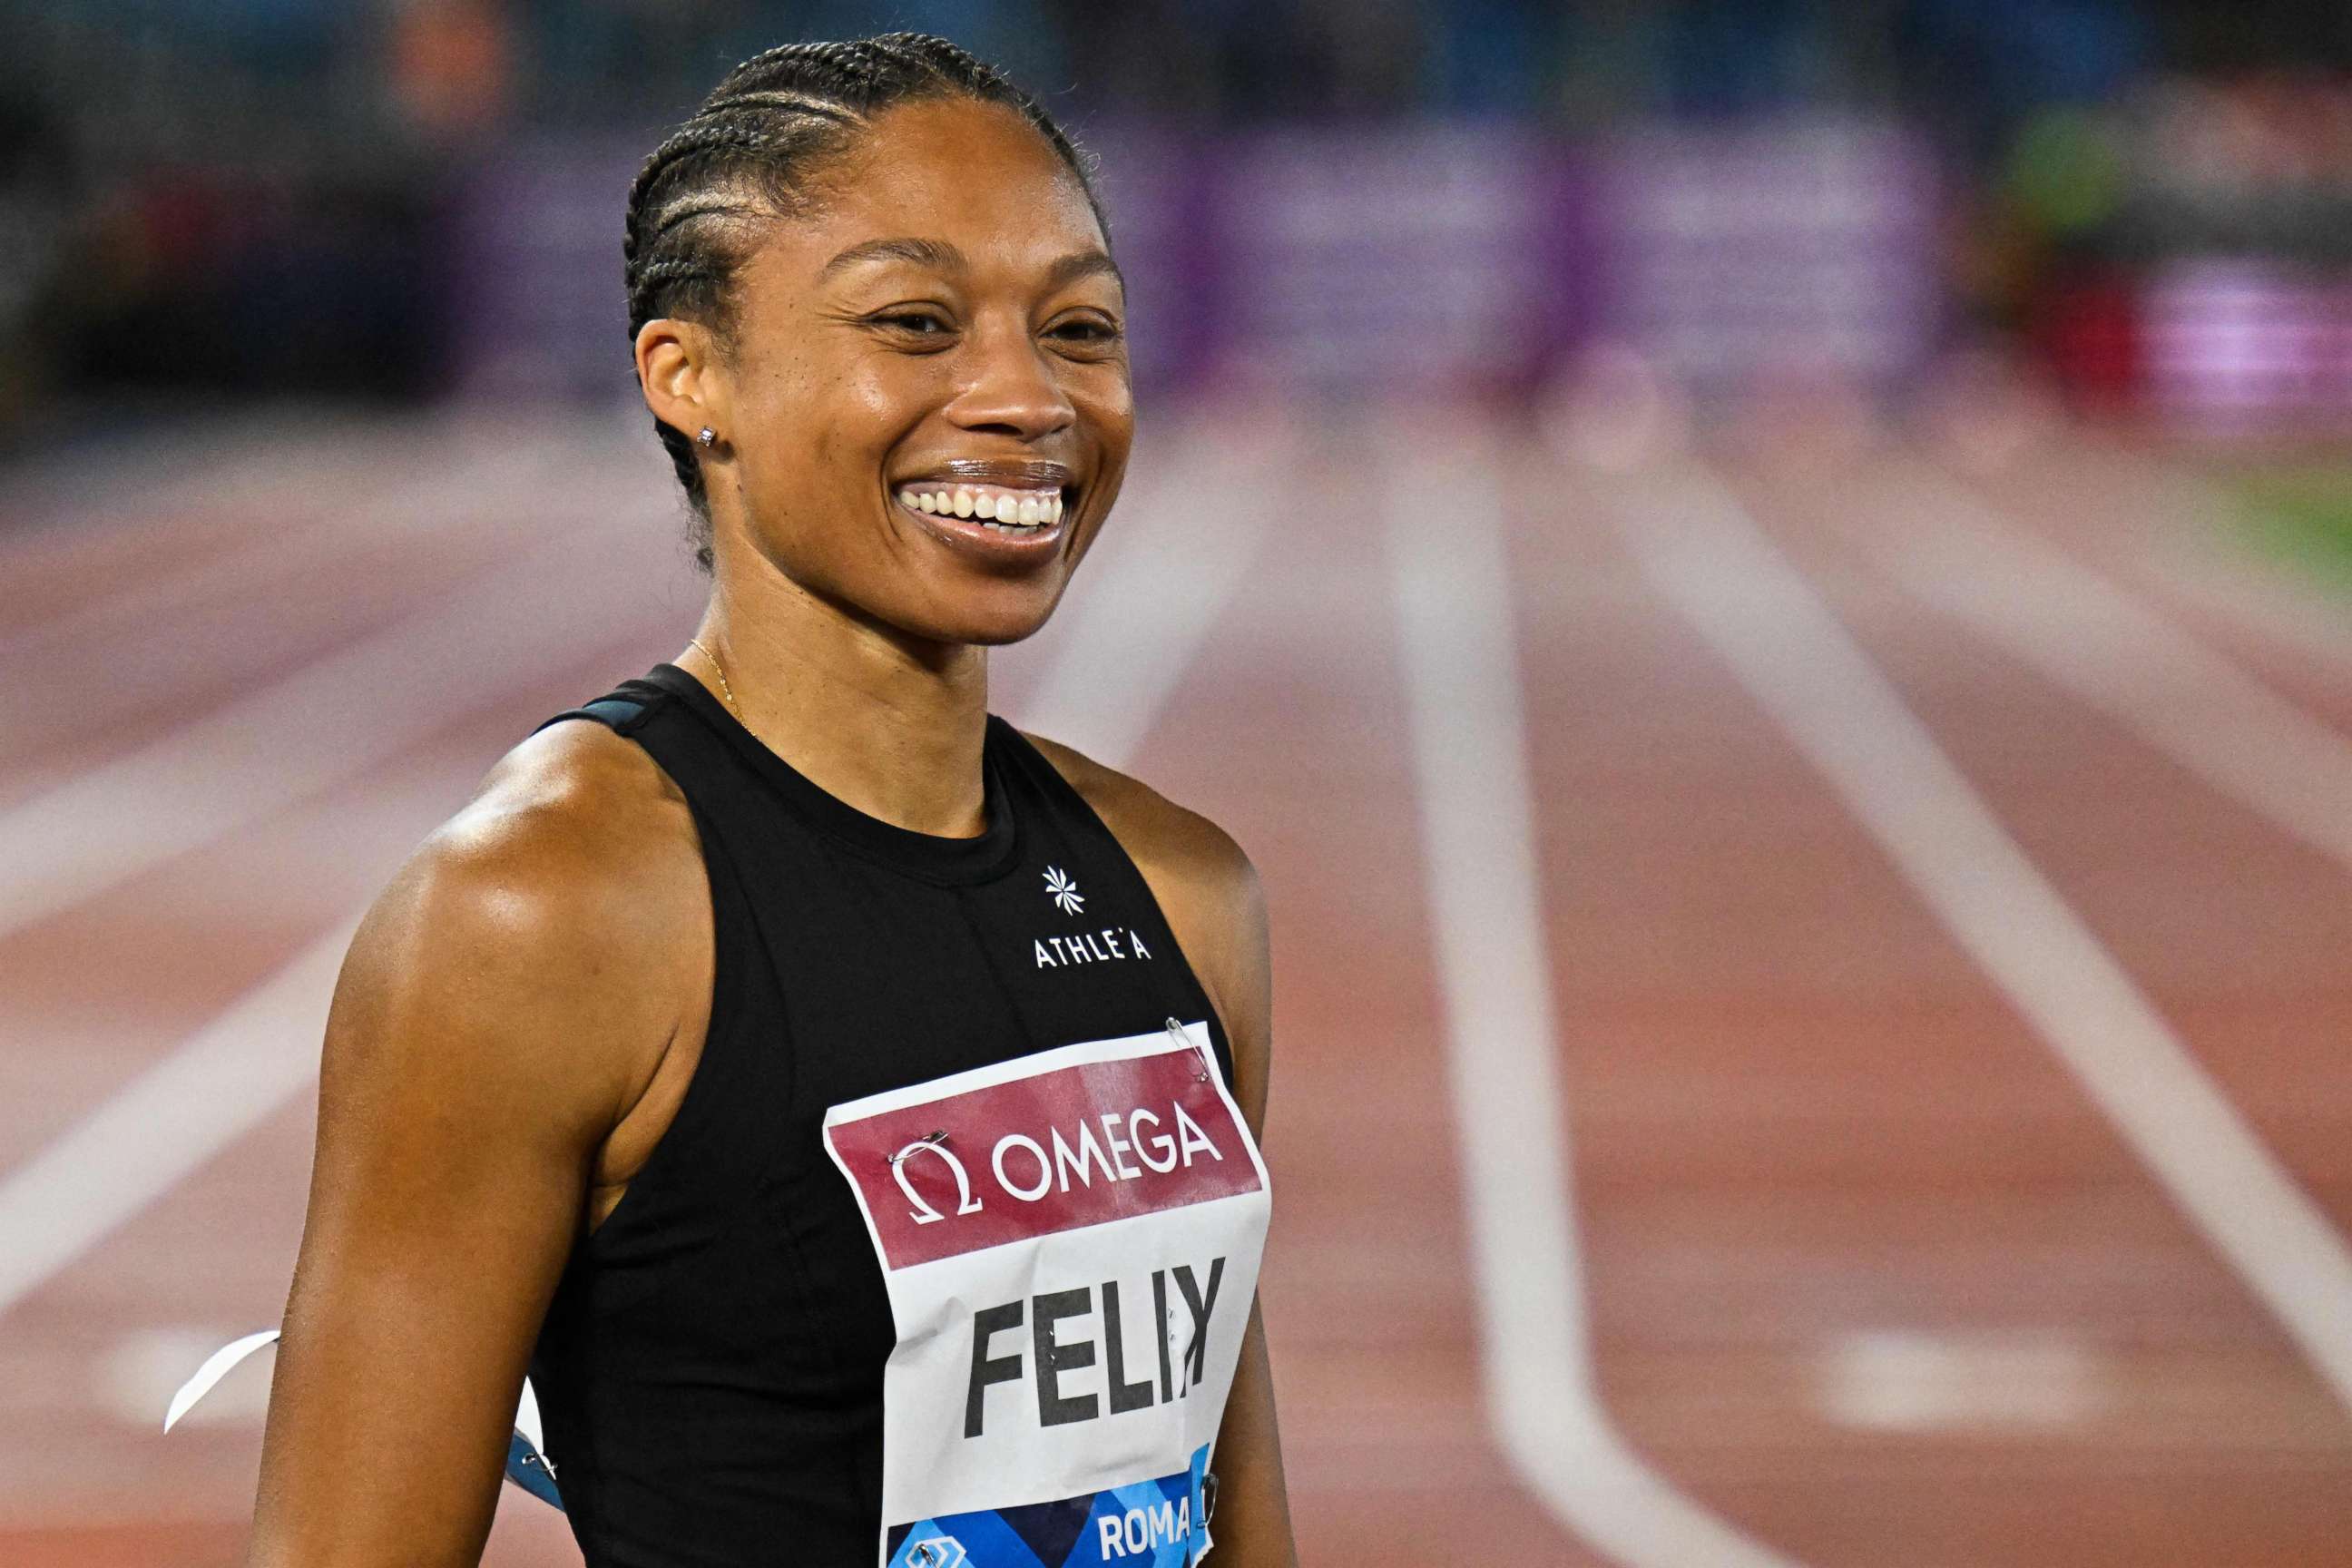 Track star Allyson Felix qualifies for her fifth Olympics -- her first as a  mother